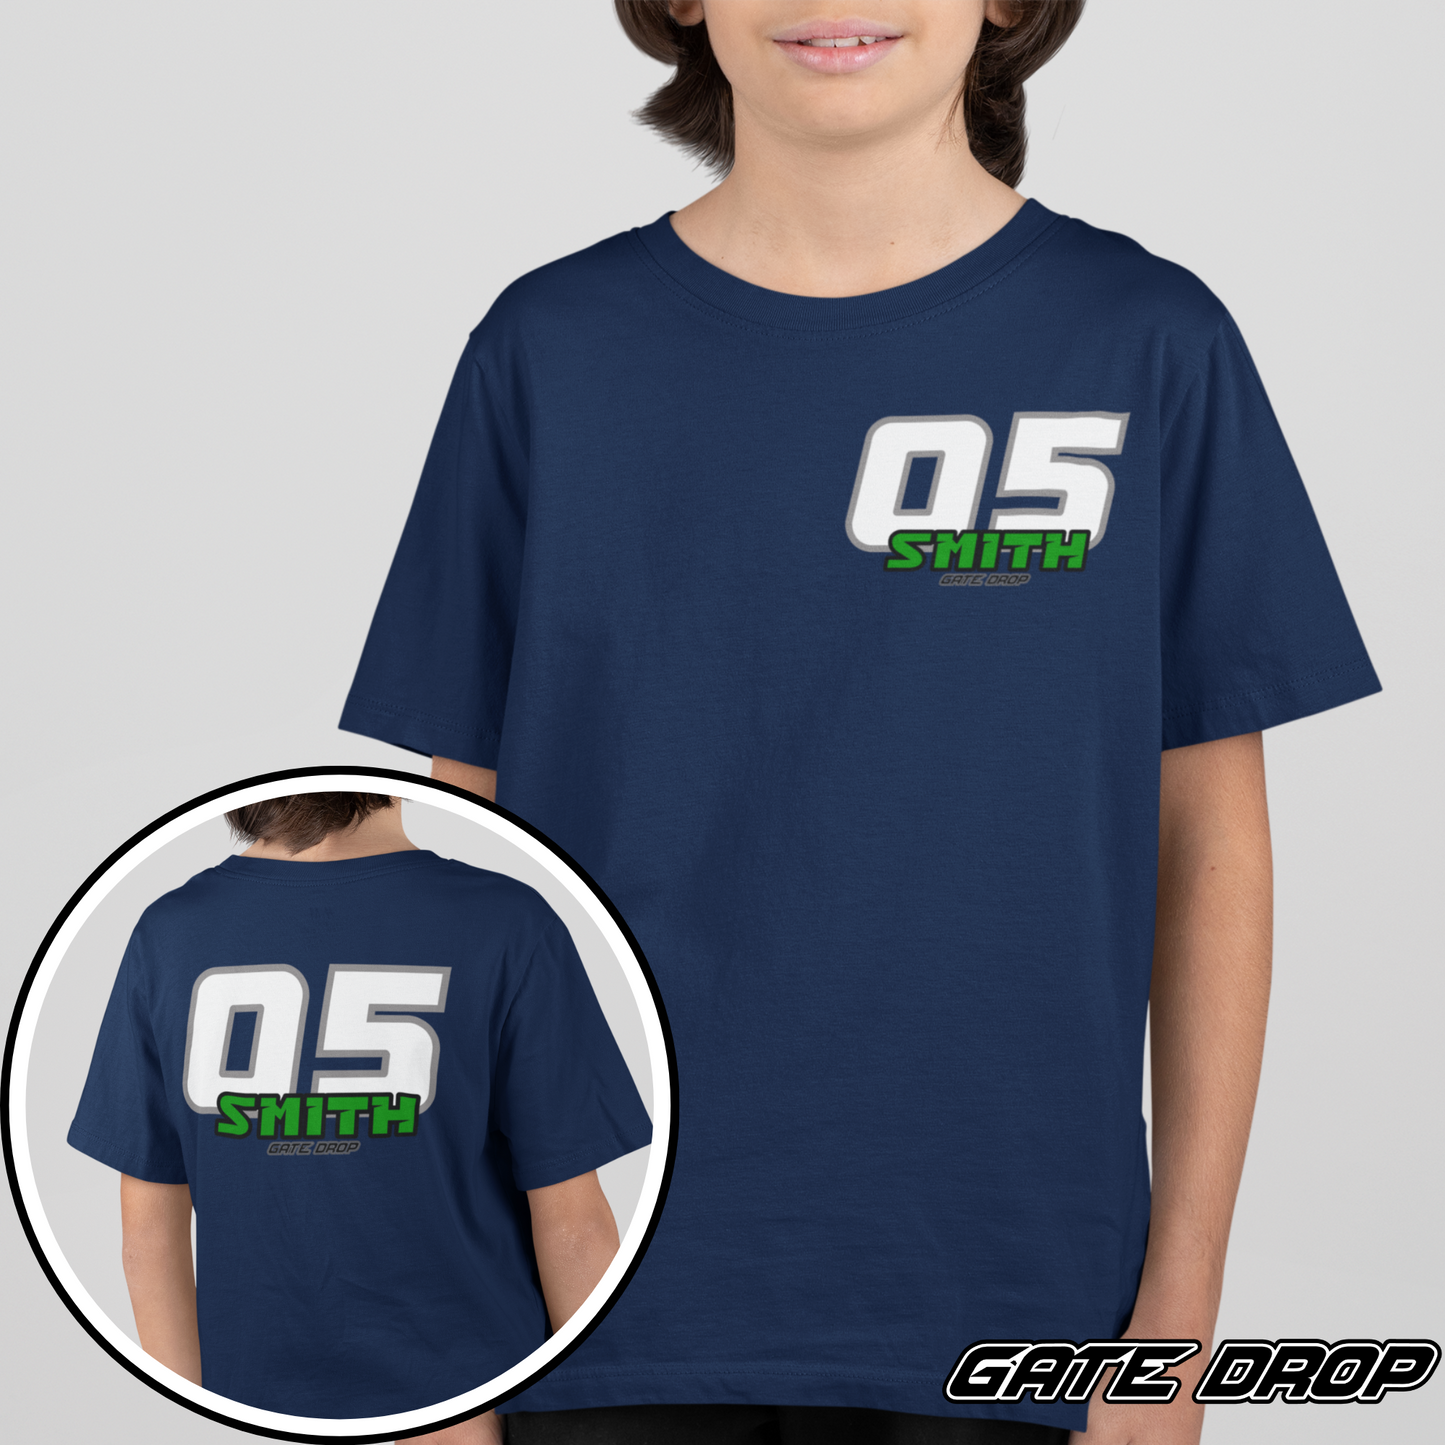 Gate Drop Personalized Race Name and Number Youth Tee shirt